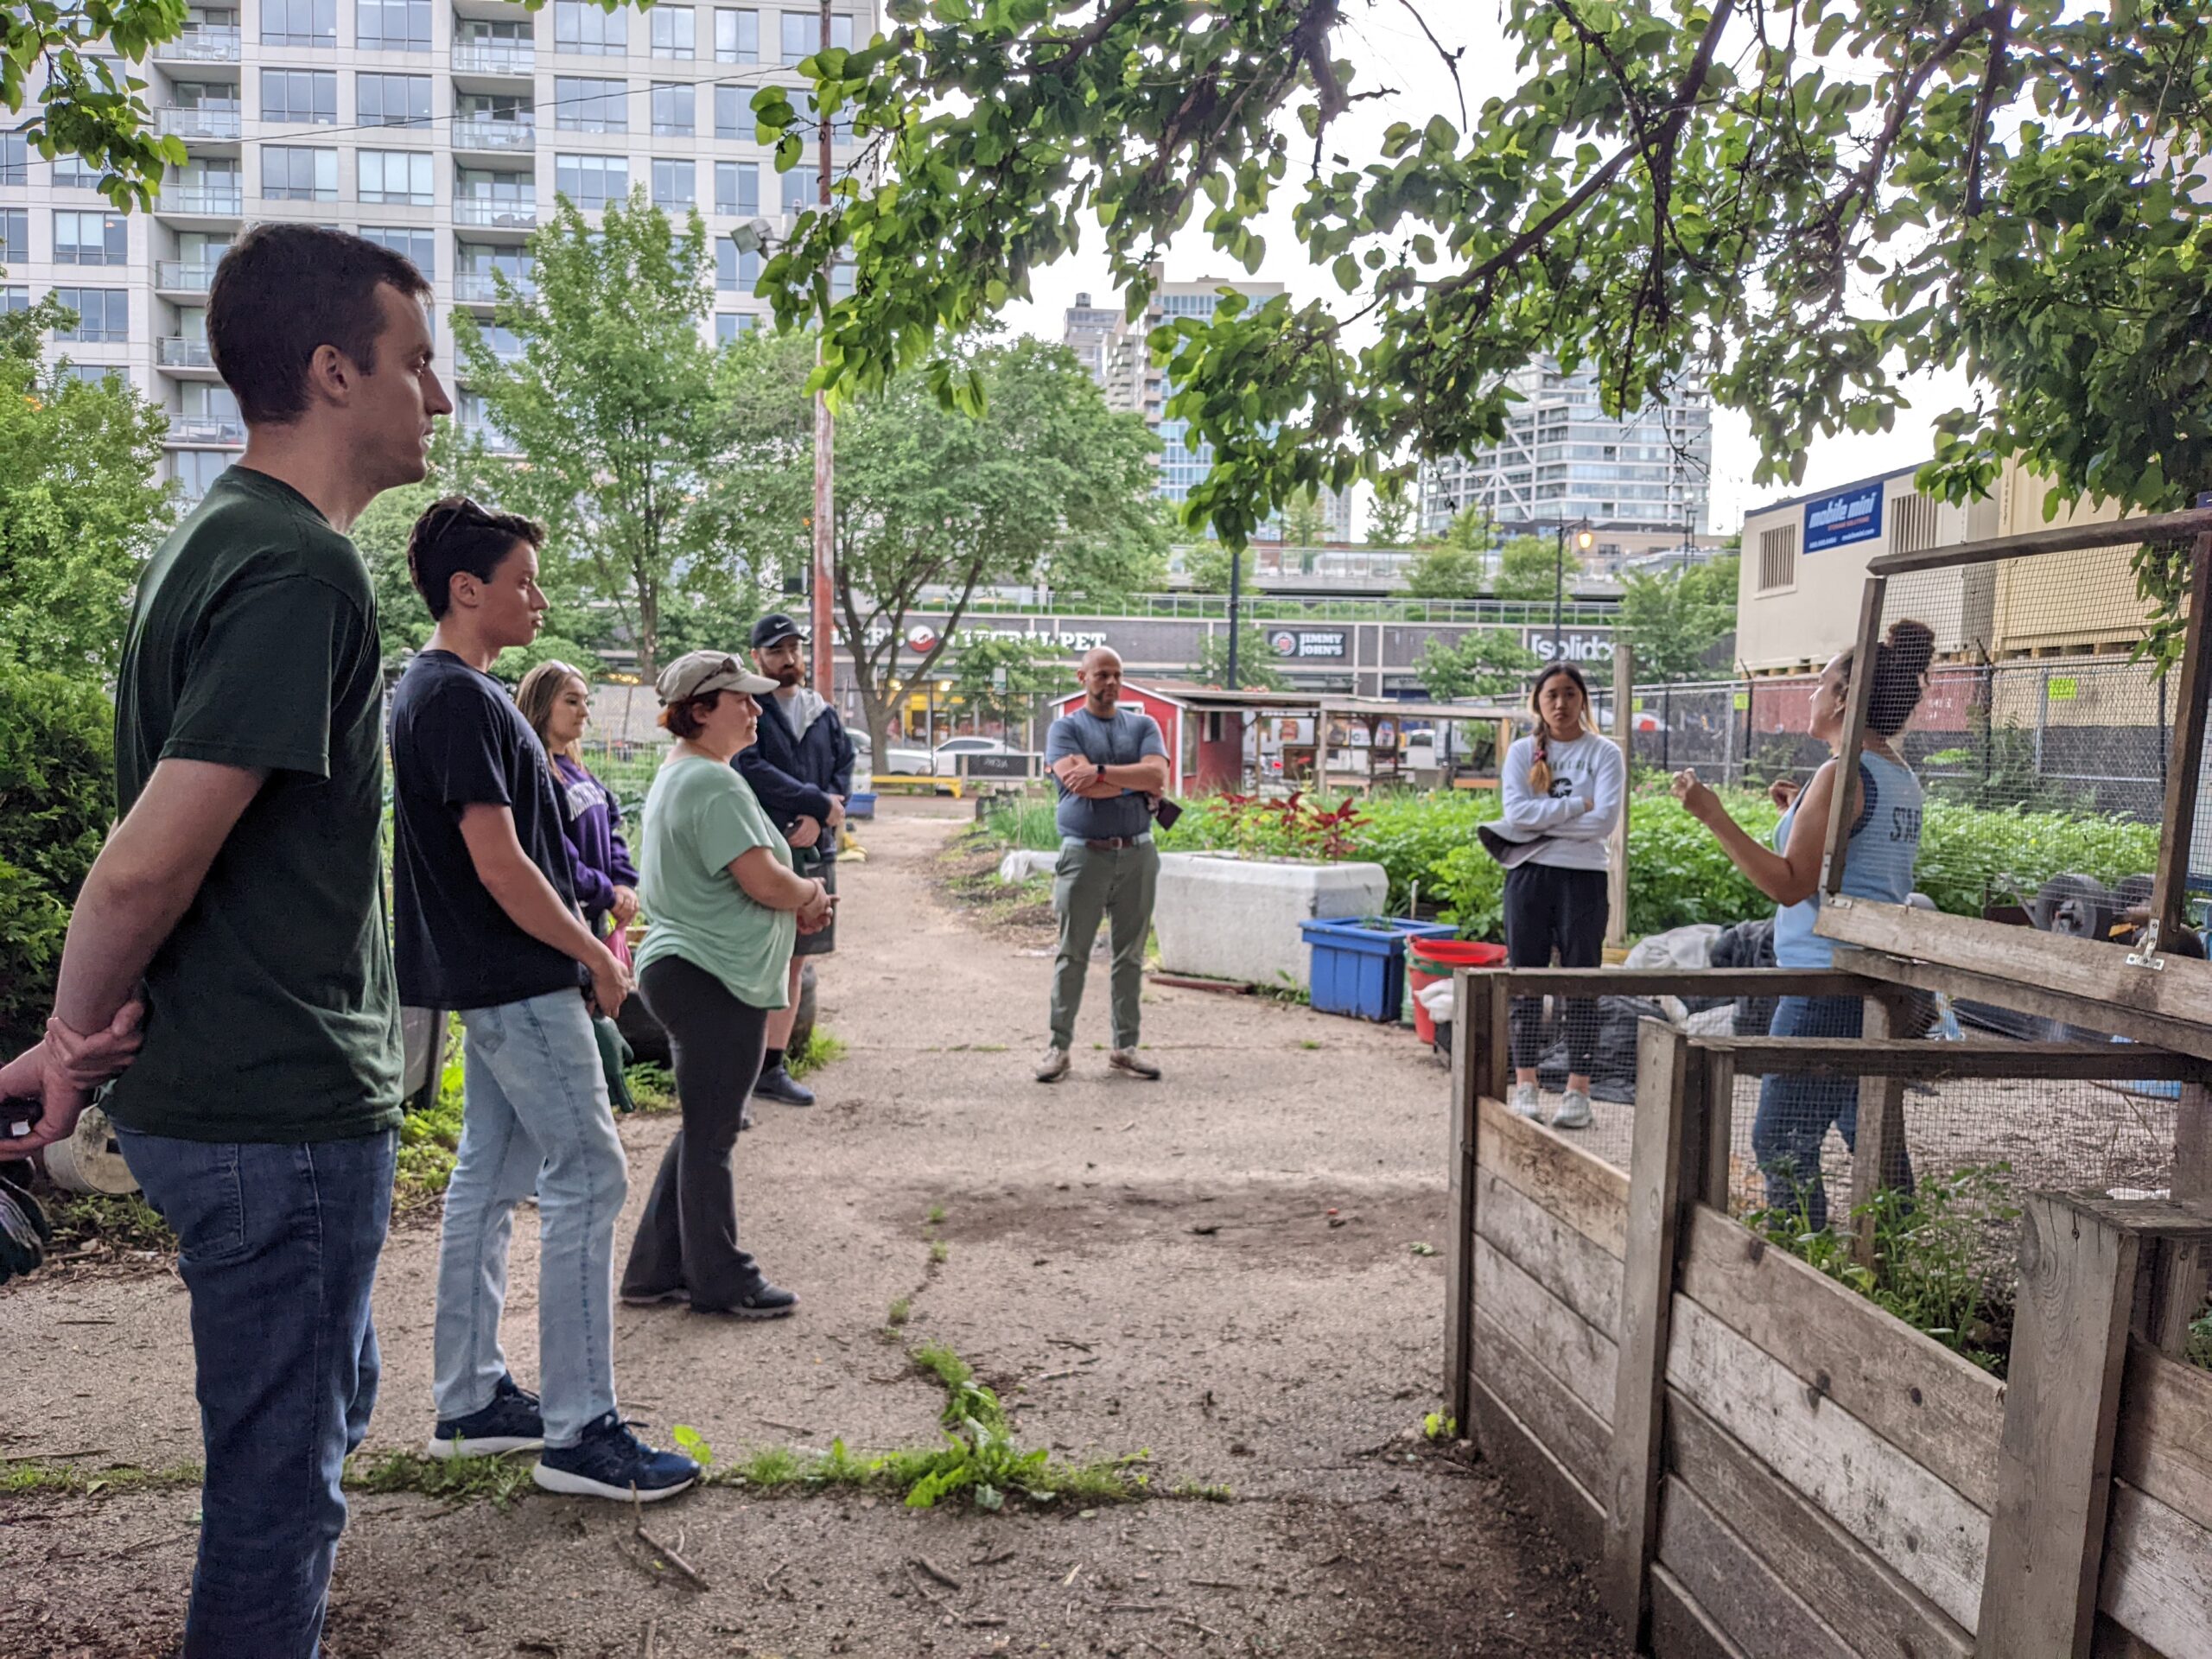 Credico volunteers listen to Urban Farm Associate Director Deja Stout as she outlines the work plan for the day.